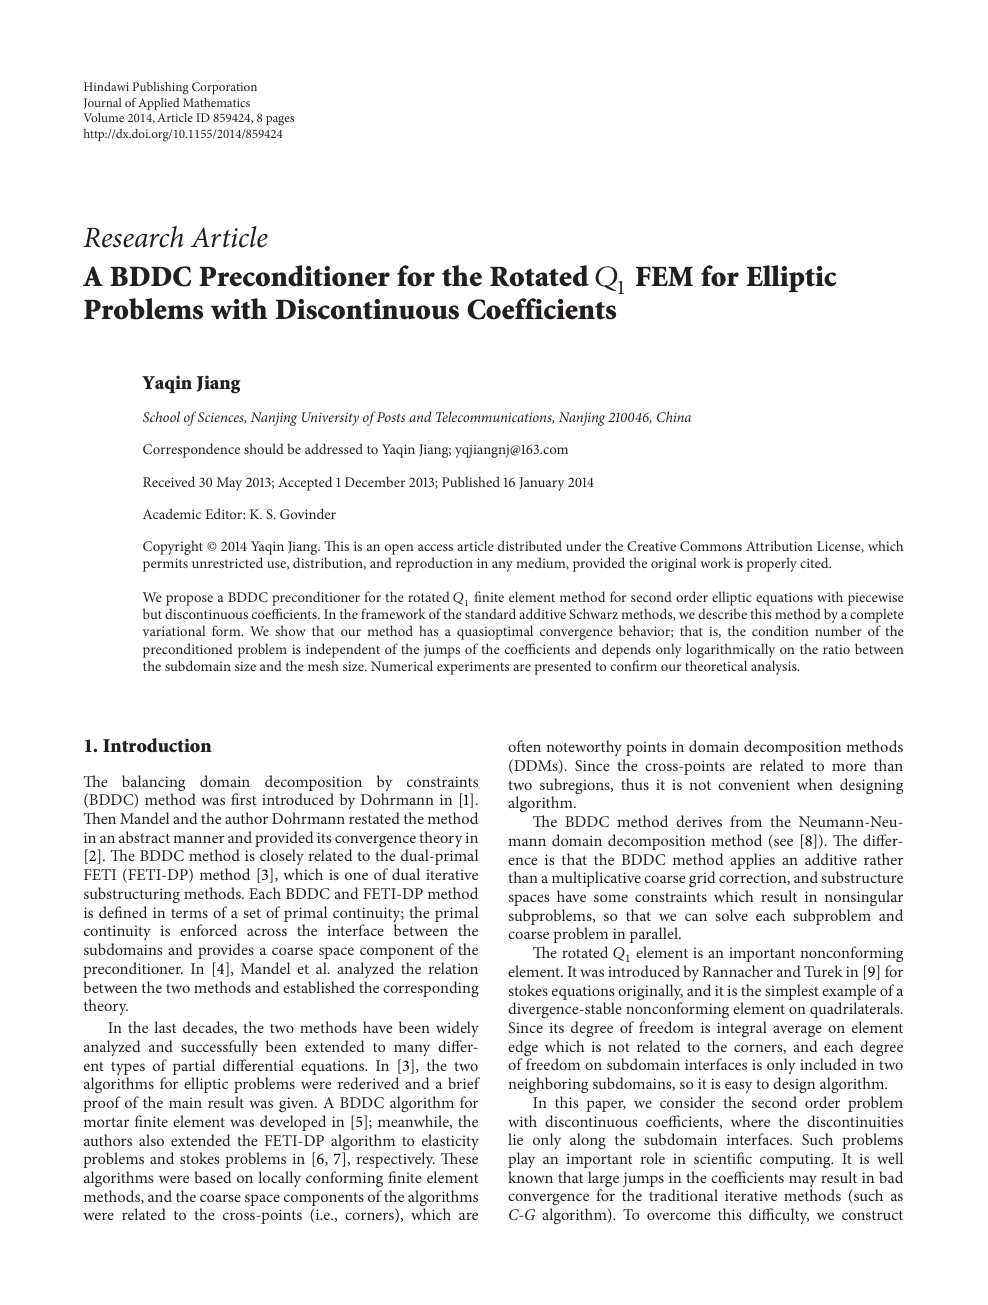 A dc Preconditioner For The Rotated Fem For Elliptic Problems With Discontinuous Coefficients Topic Of Research Paper In Mathematics Download Scholarly Article Pdf And Read For Free On Cyberleninka Open Science